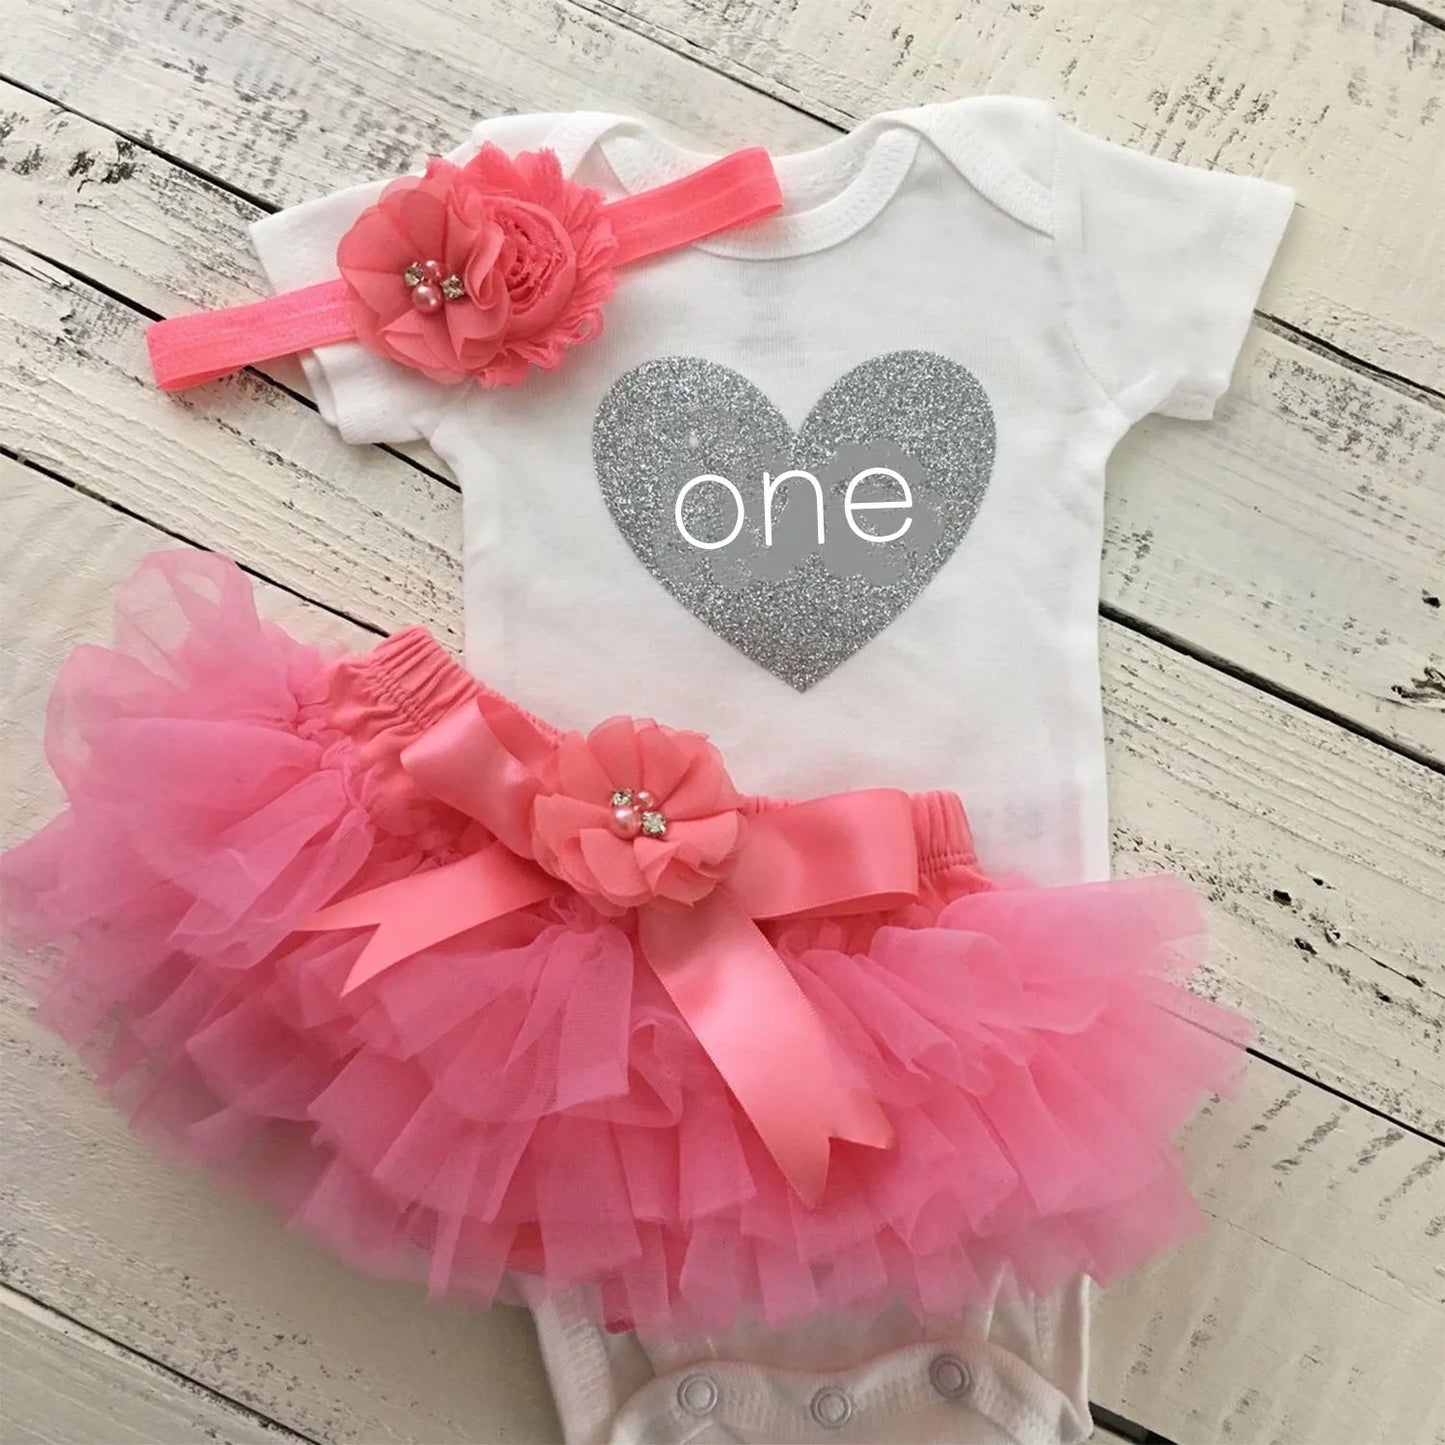 Baby Girls Christening Gown First 1st Birthday Party Outfit Girl Baby Clothing Toddler Summer Clothes Infant Vestido Infantil